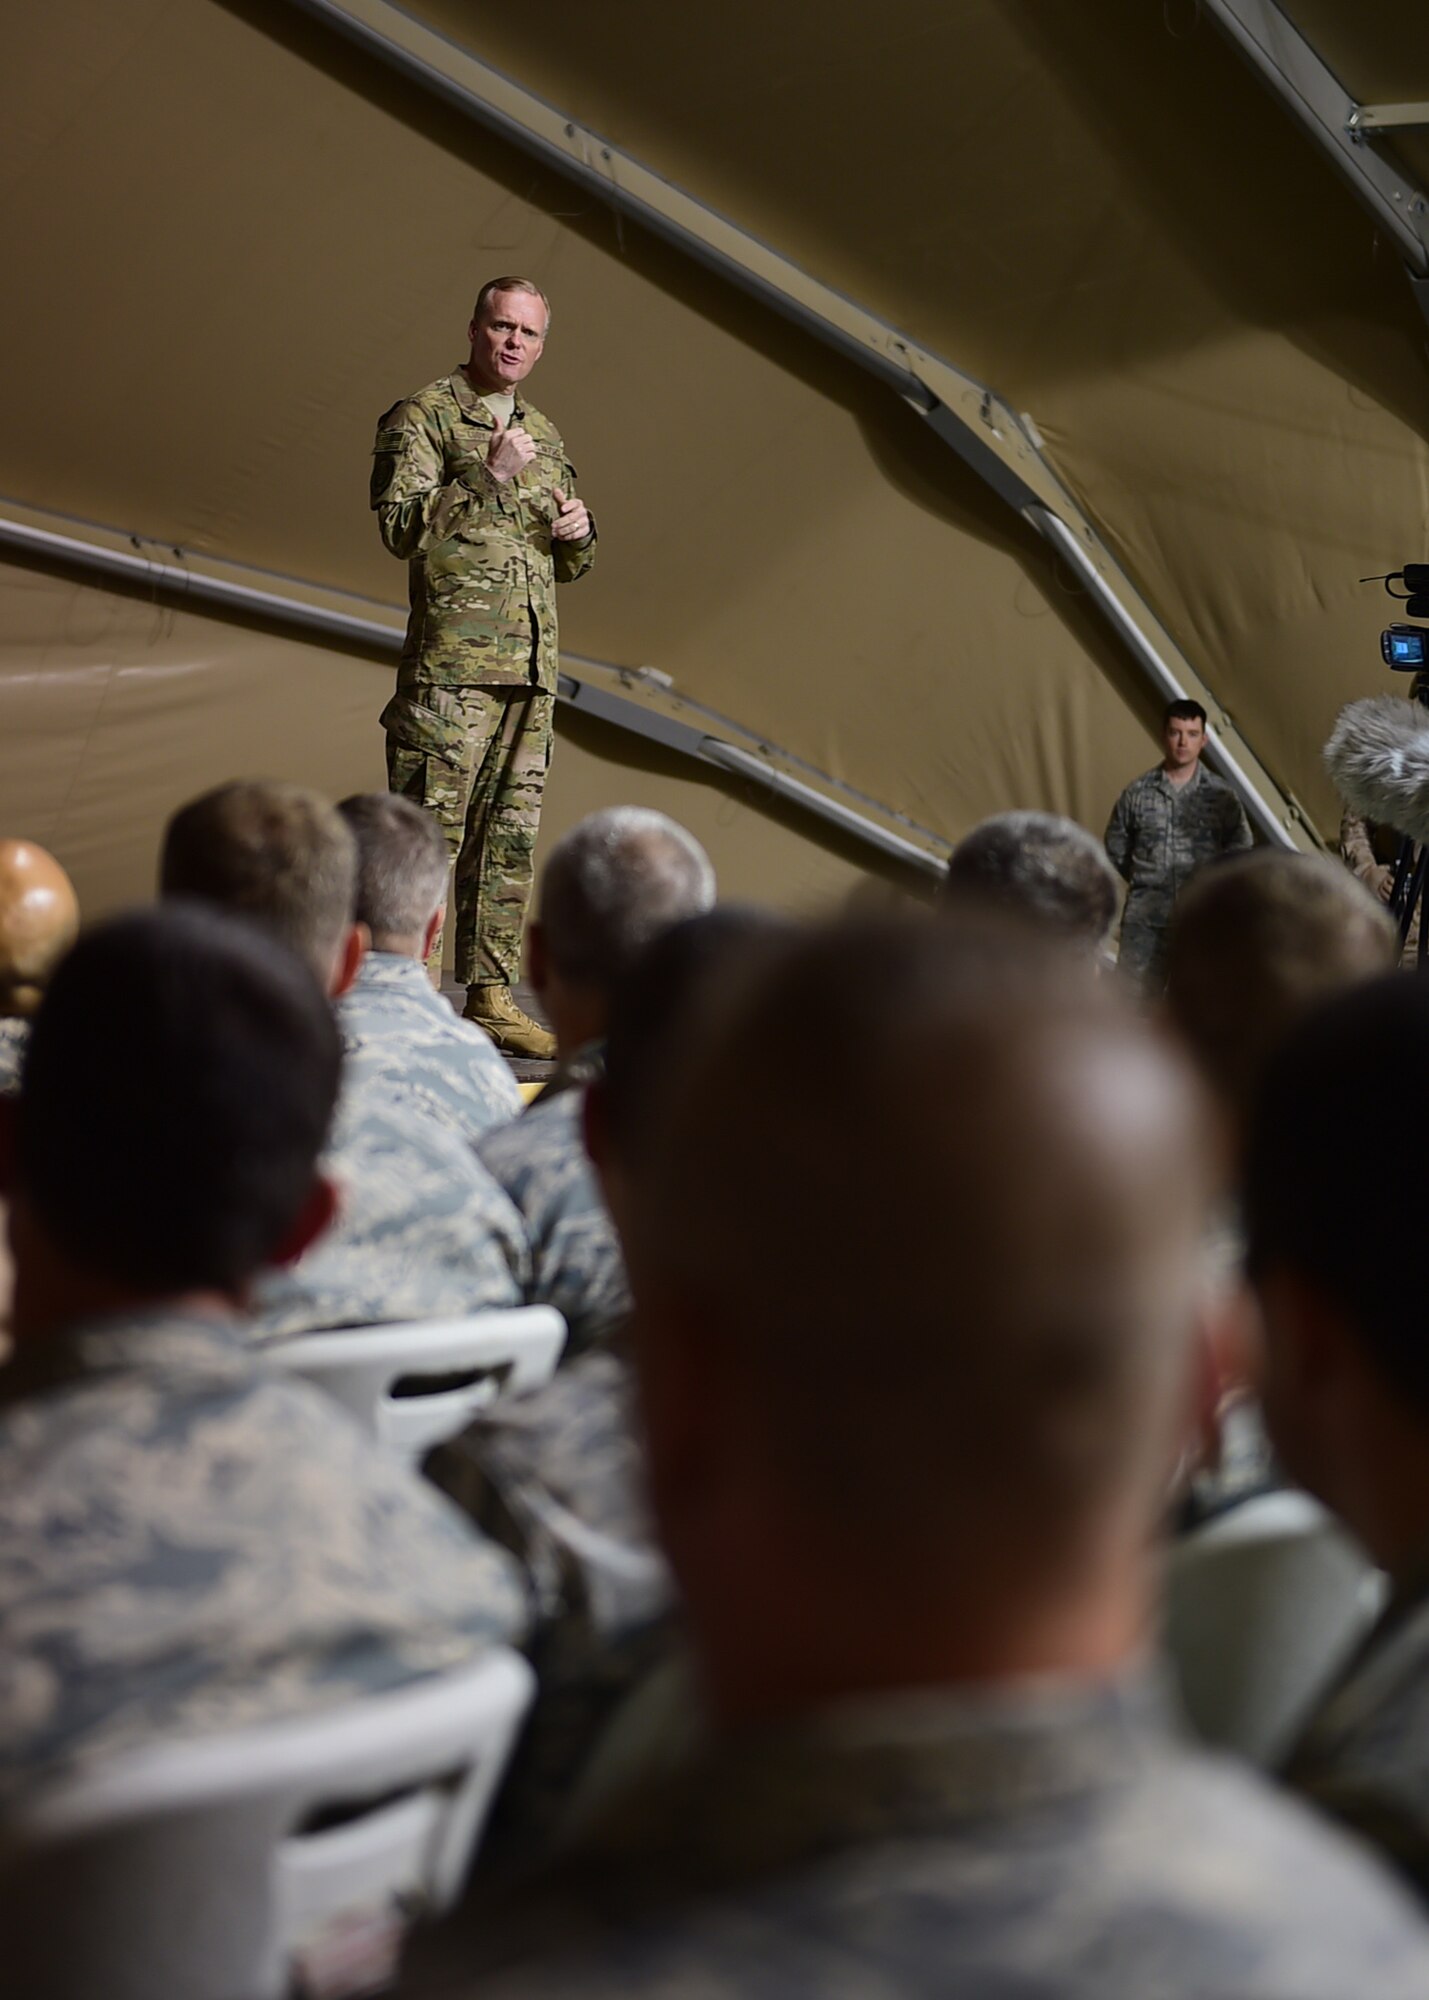 Chief Master Sgt. of the Air Force James A. Cody speaks to Airmen currently deployed to the 332nd Air Expeditionary Wing at an undisclosed location in Southwest Asia, Dec. 10, 2015. During the visit Cody and Air Force Chief of Staff Gen. Mark A. Welsh III hosted an all-call during which they expressed gratitude and thanks for the hard work and sacrifices the Airmen make in support of Operation INHERENT RESOLVE. (U.S. Air Force photo by Staff Sgt. Jerilyn Quintanilla)